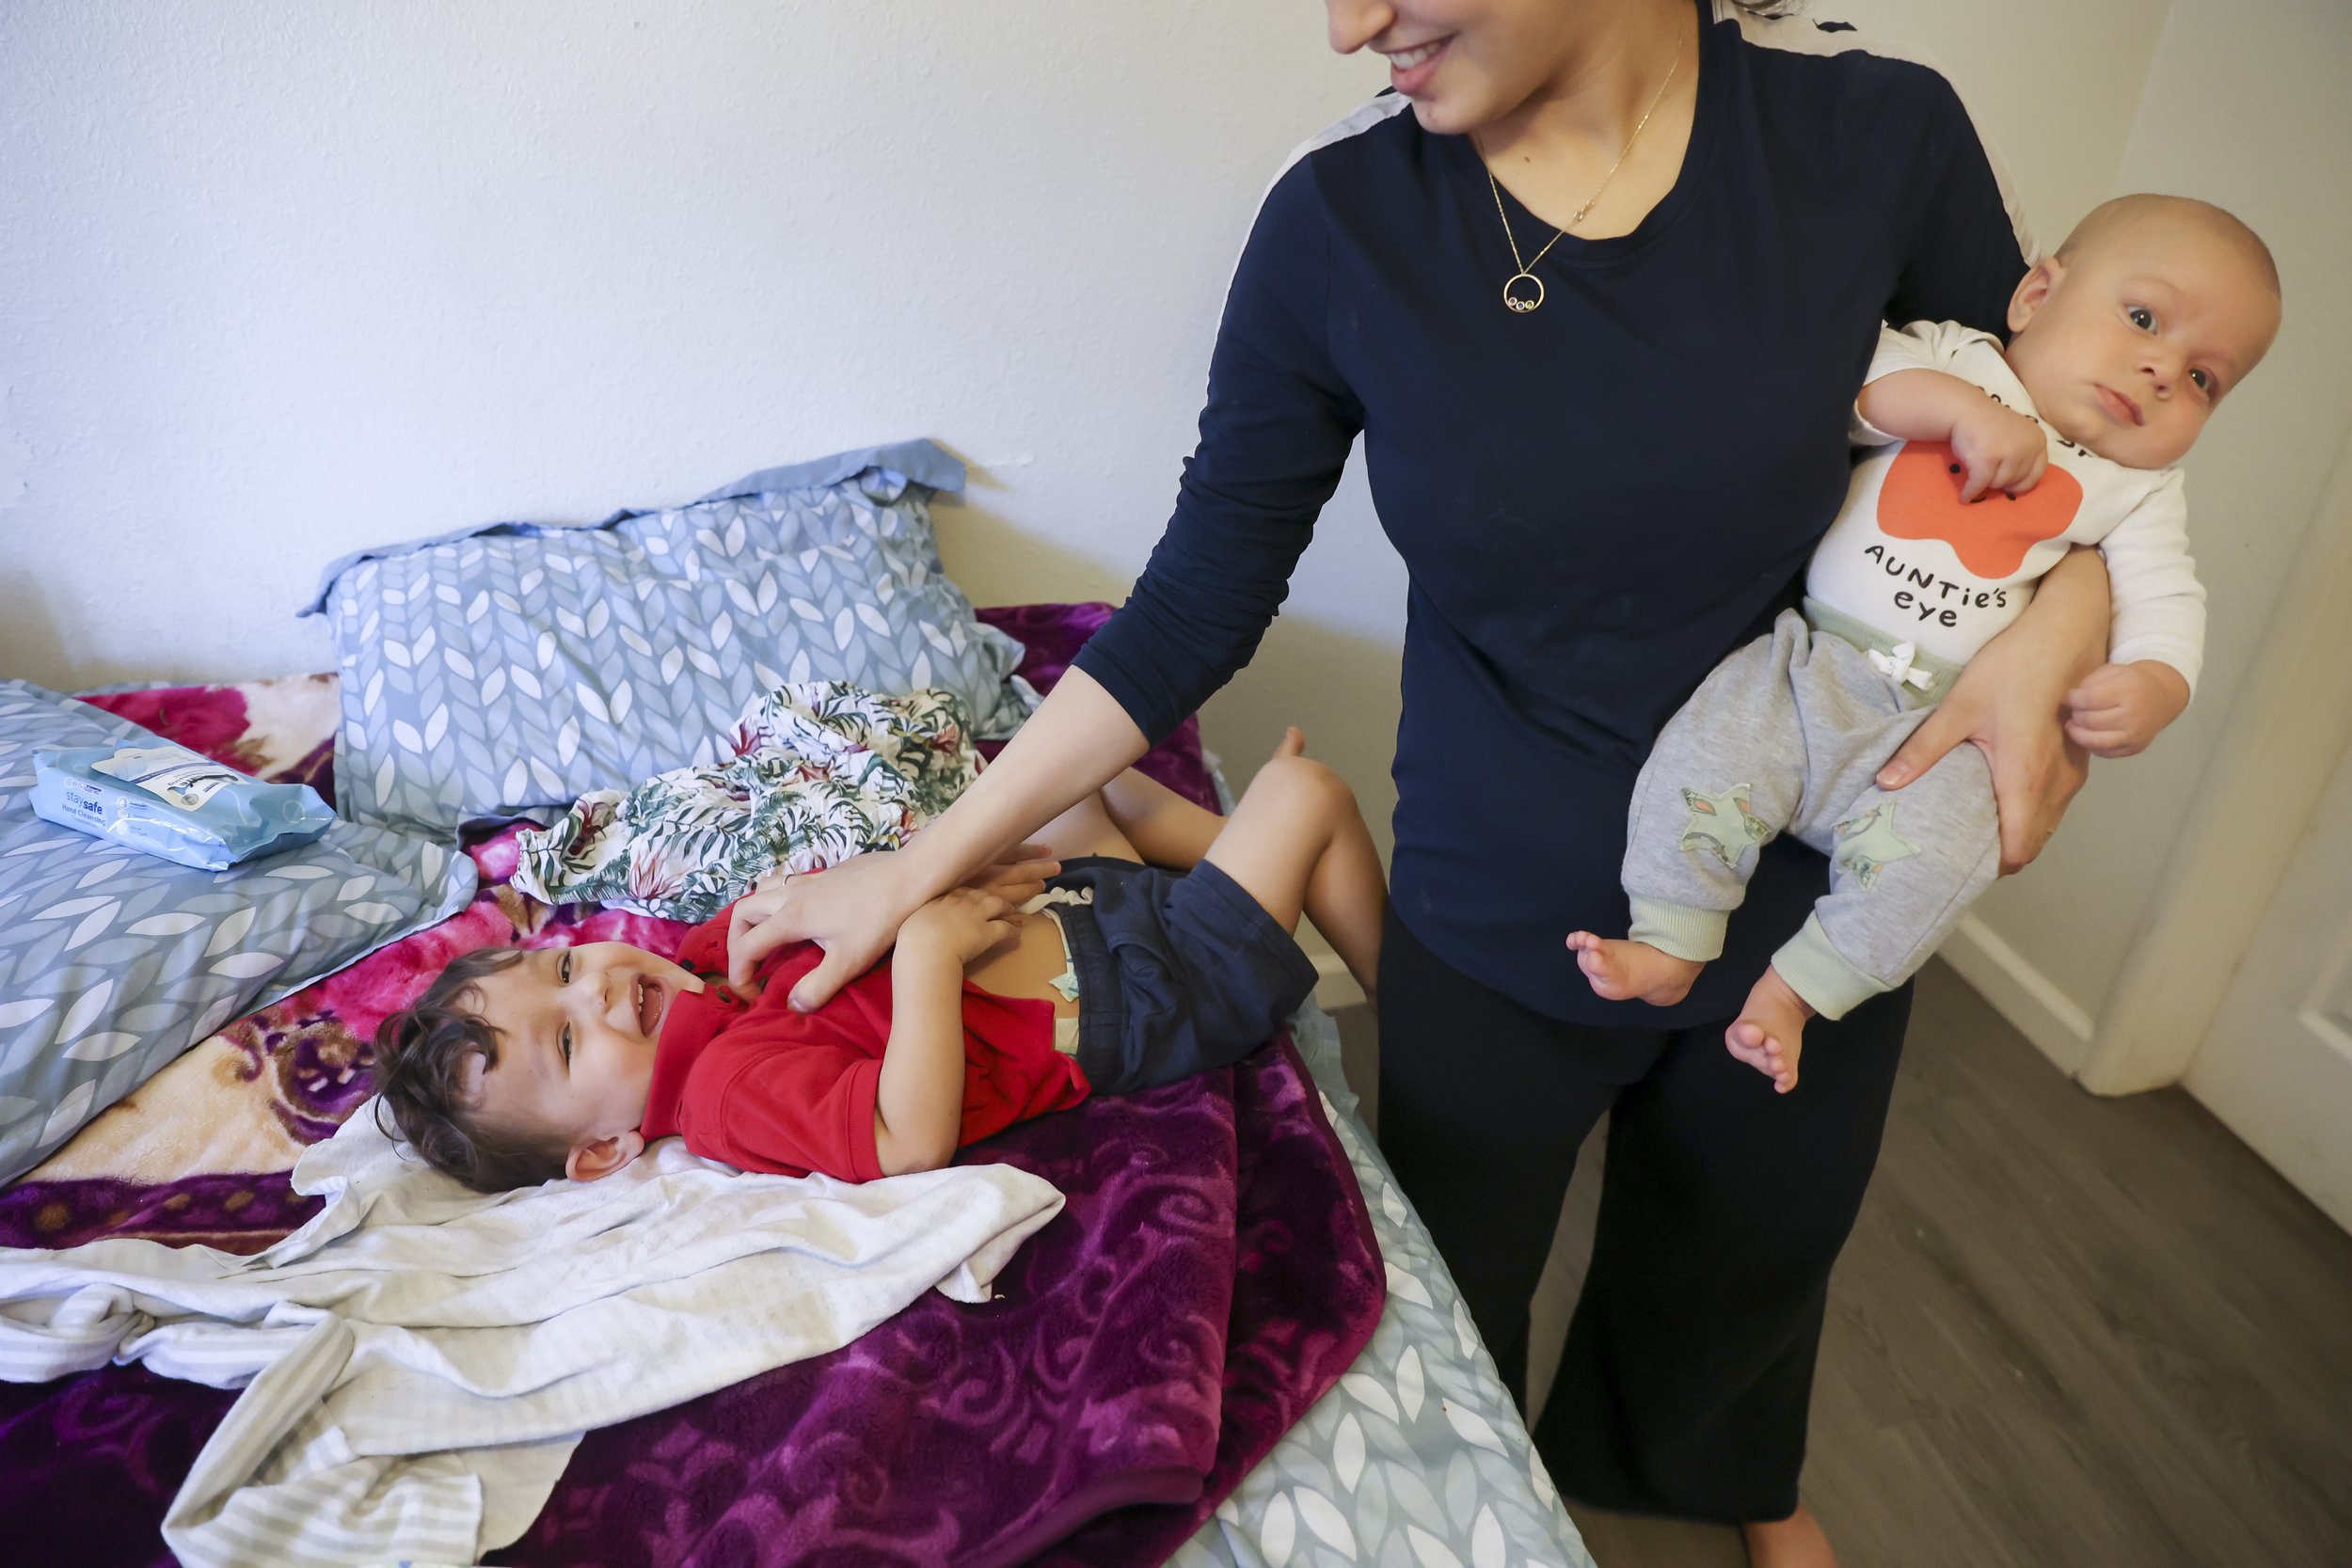  Susan Mohammadi holds her two-month-old son Yusuf Mohammadi while she plays with her older son Yasar (1) on her bed at home in Sacramento, Calif. on Thursday, July 21, 2022. Najibullah Mohammadi, his wife Susan, their two young children Zahra and Ya